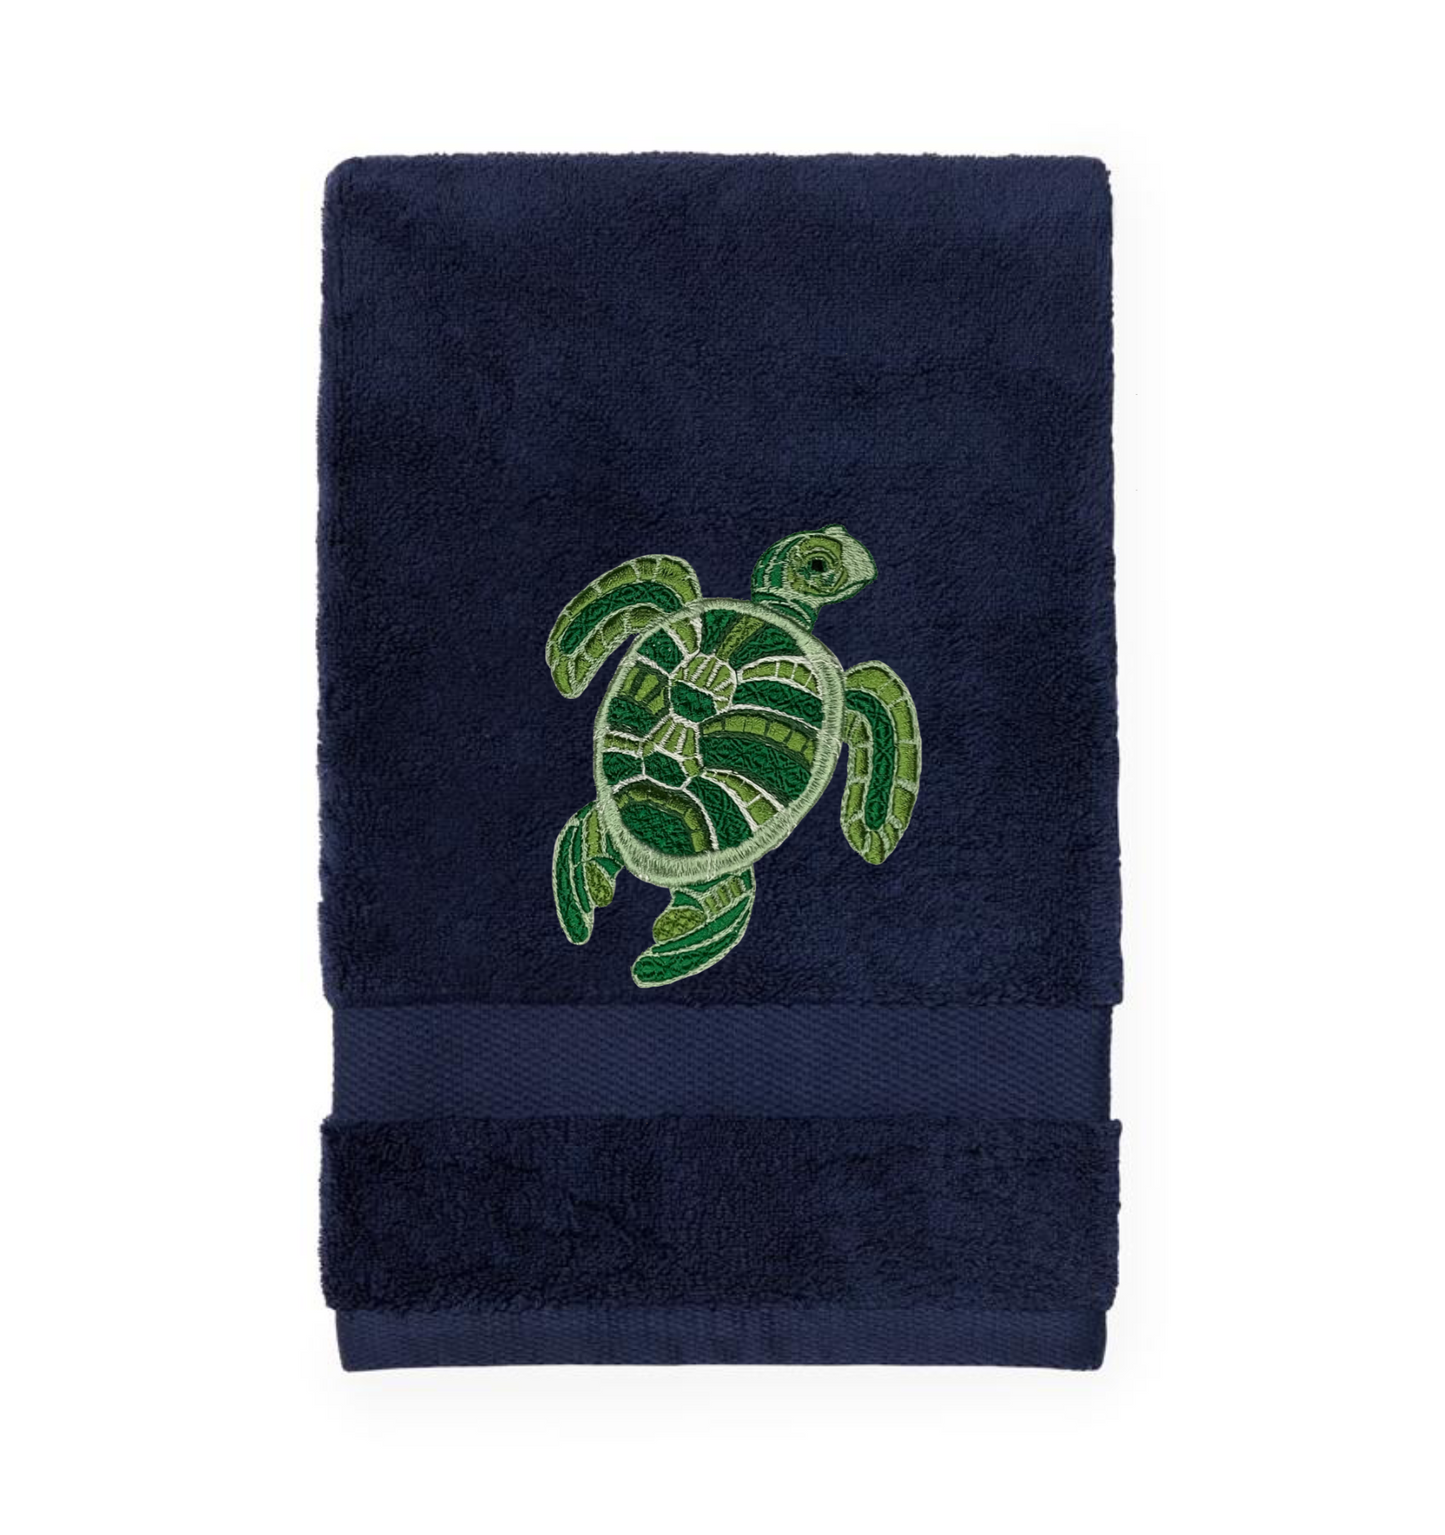 Embroidered Hand Towel Sea Turtle. Beautifully Detailed Sea Turtle in Blue or Green Embroidery